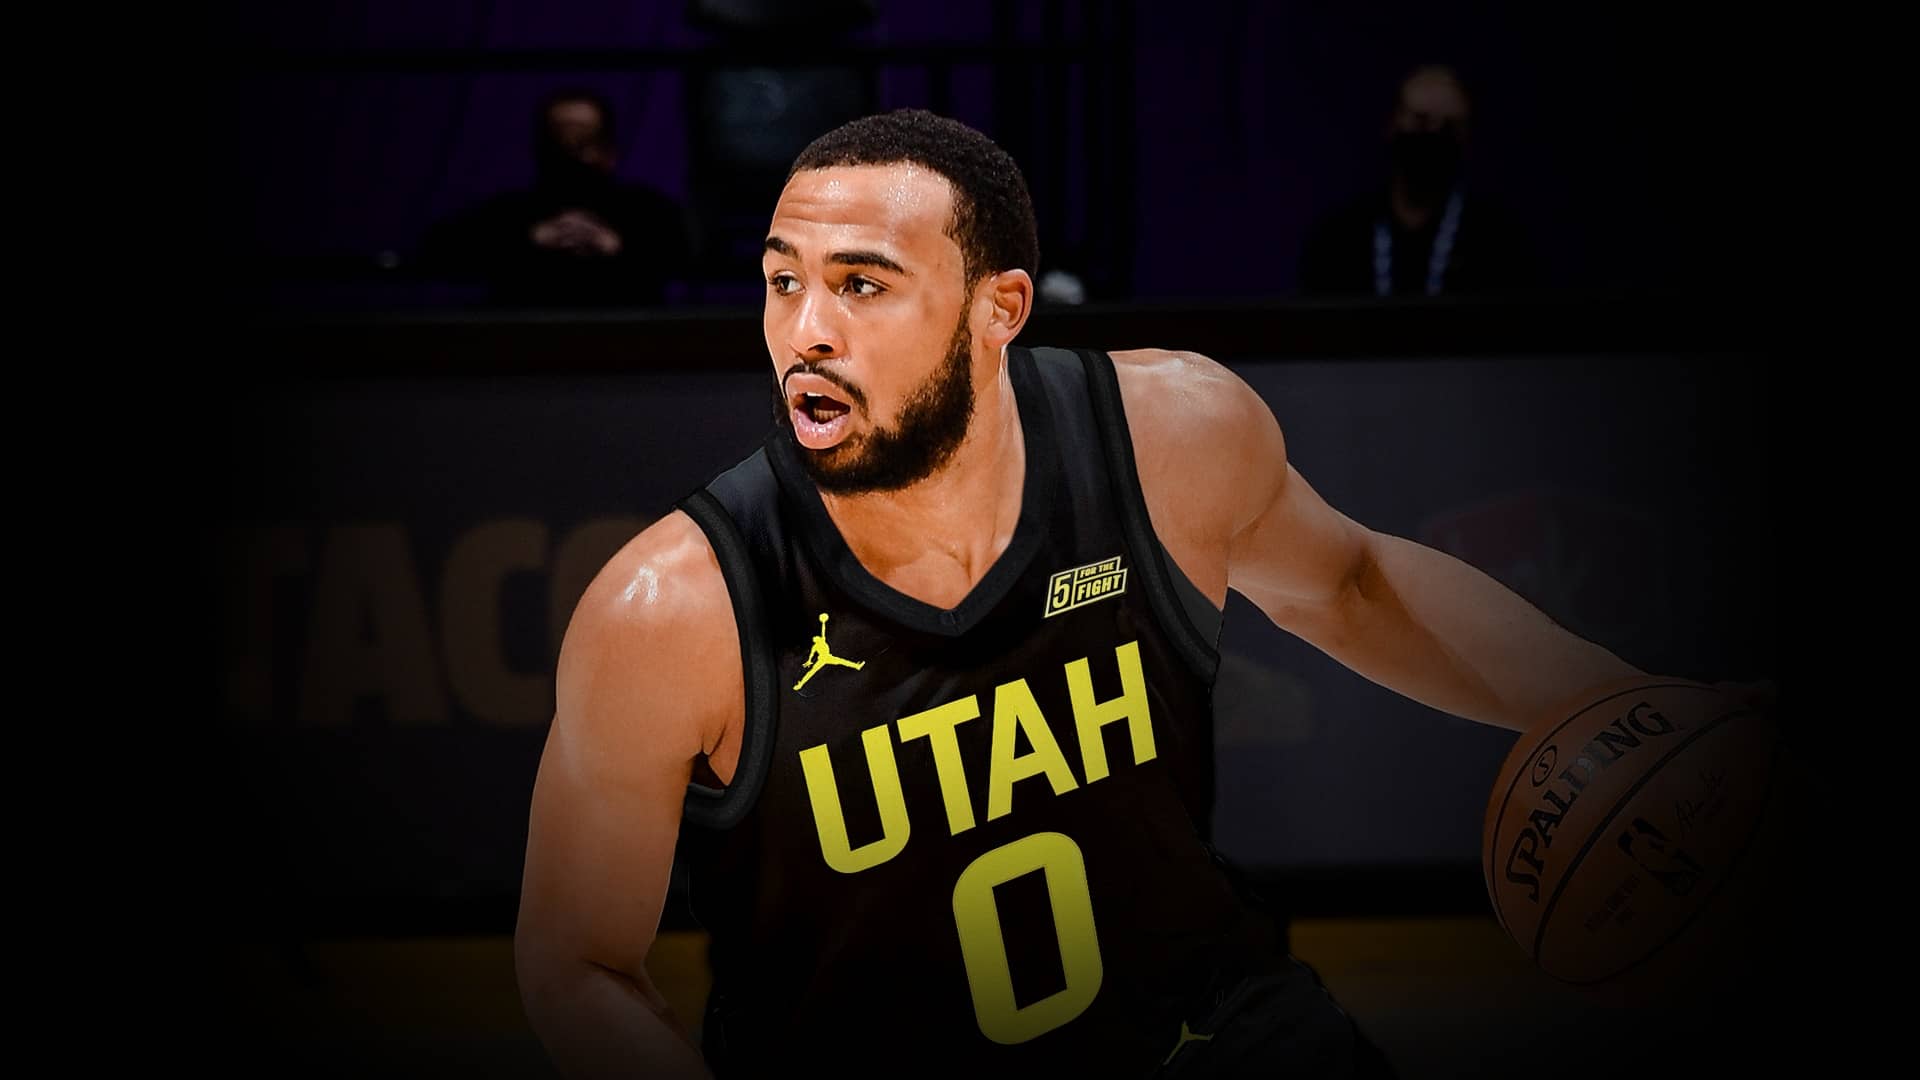 Talen Horton-Tucker, who won an NBA title with the Lakers in 2020, is the third youngest player ever to accomplish this feat at the age of 19 years, 321 days.